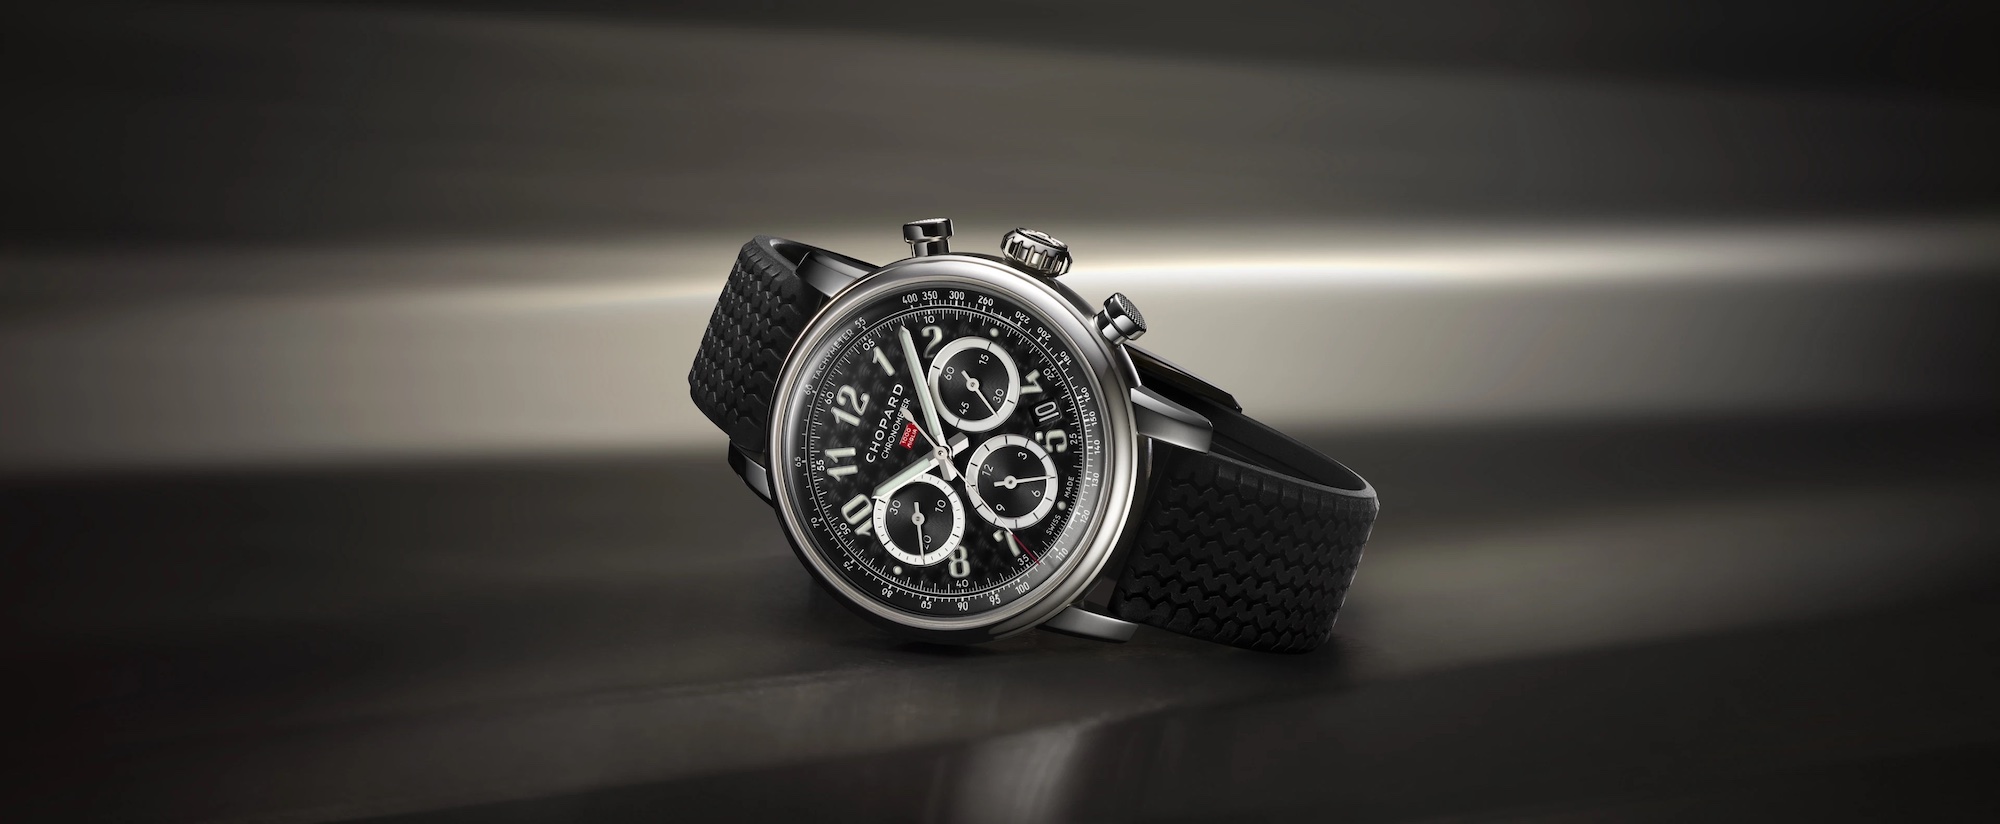 Chopard Mille Miglia Classic Chronograph 40,5 mm 168619-3001 Lifestyle